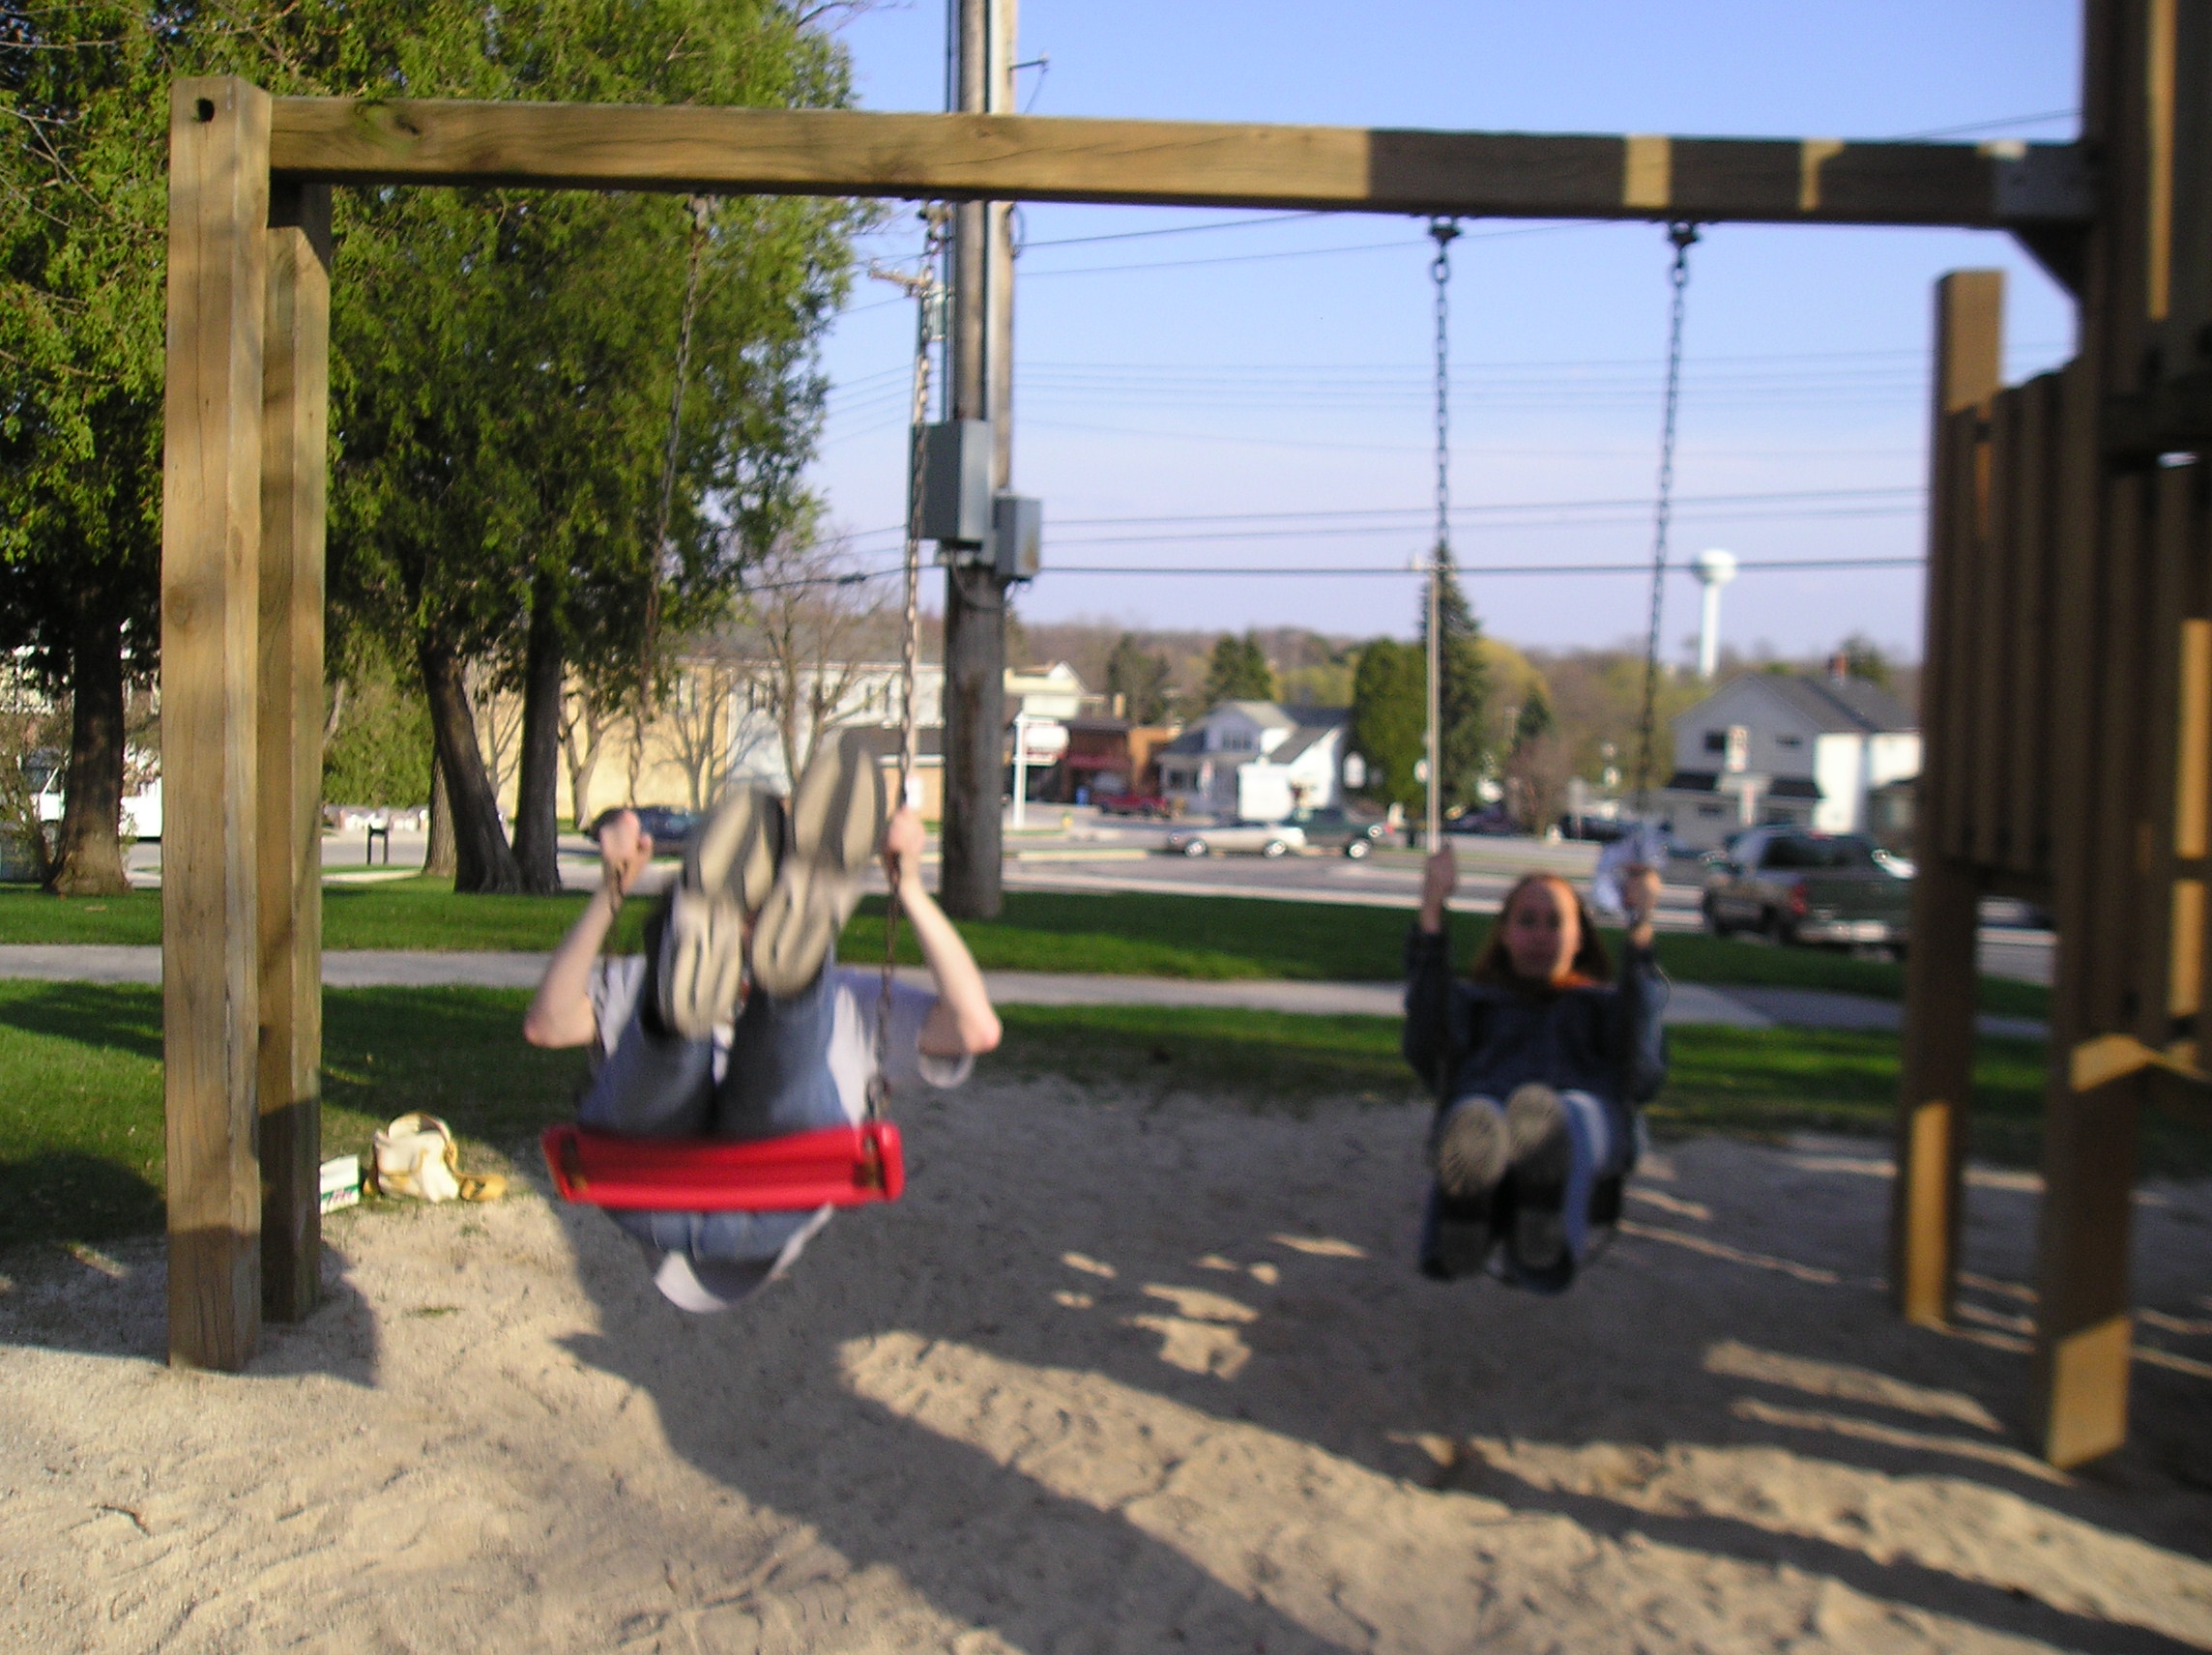 Me and McBeth on the swings.